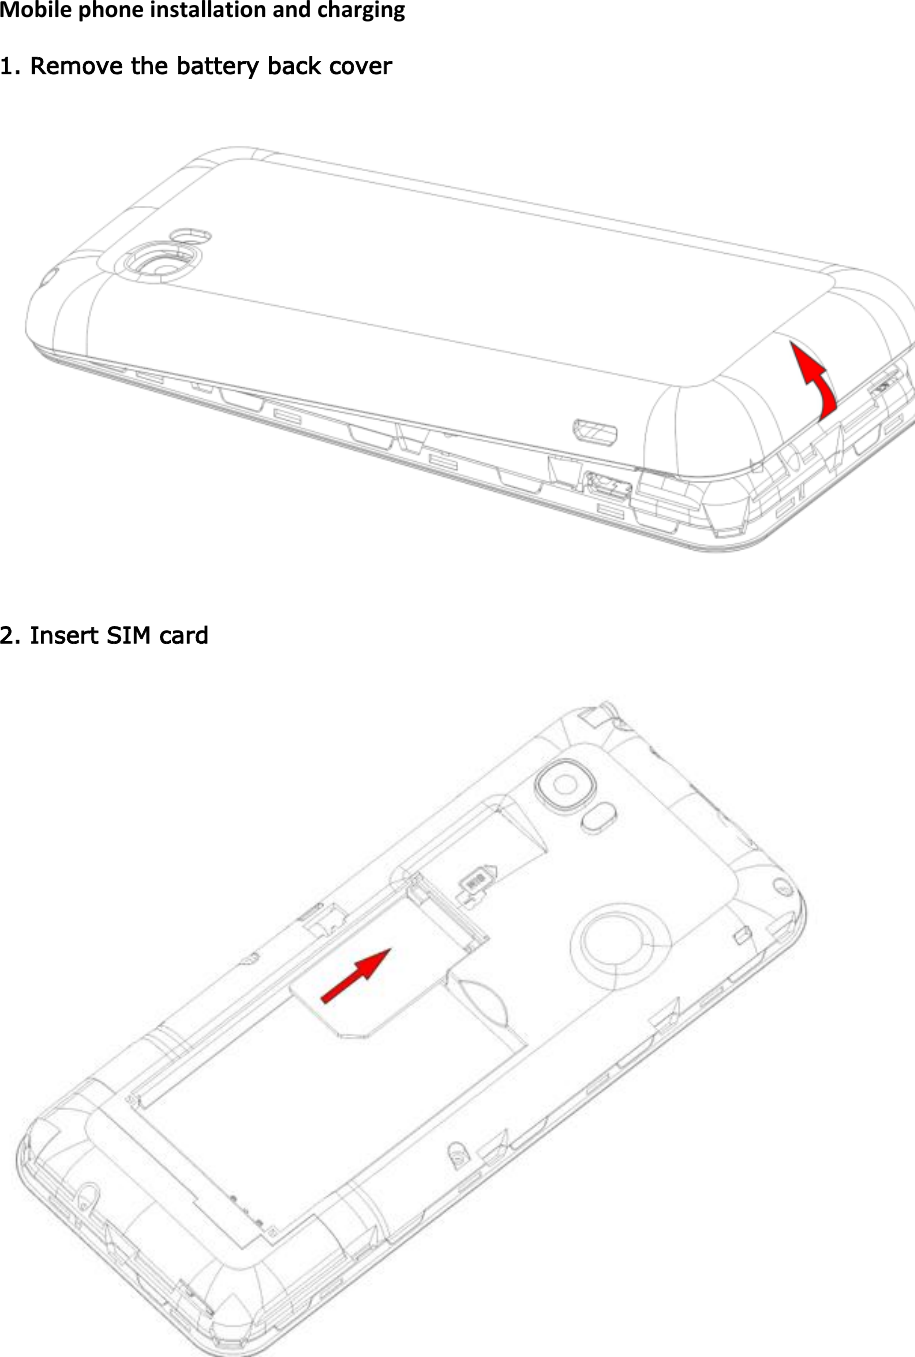  Mobile phone installation and charging 1. Remove the battery back cover  2. Insert SIM card  